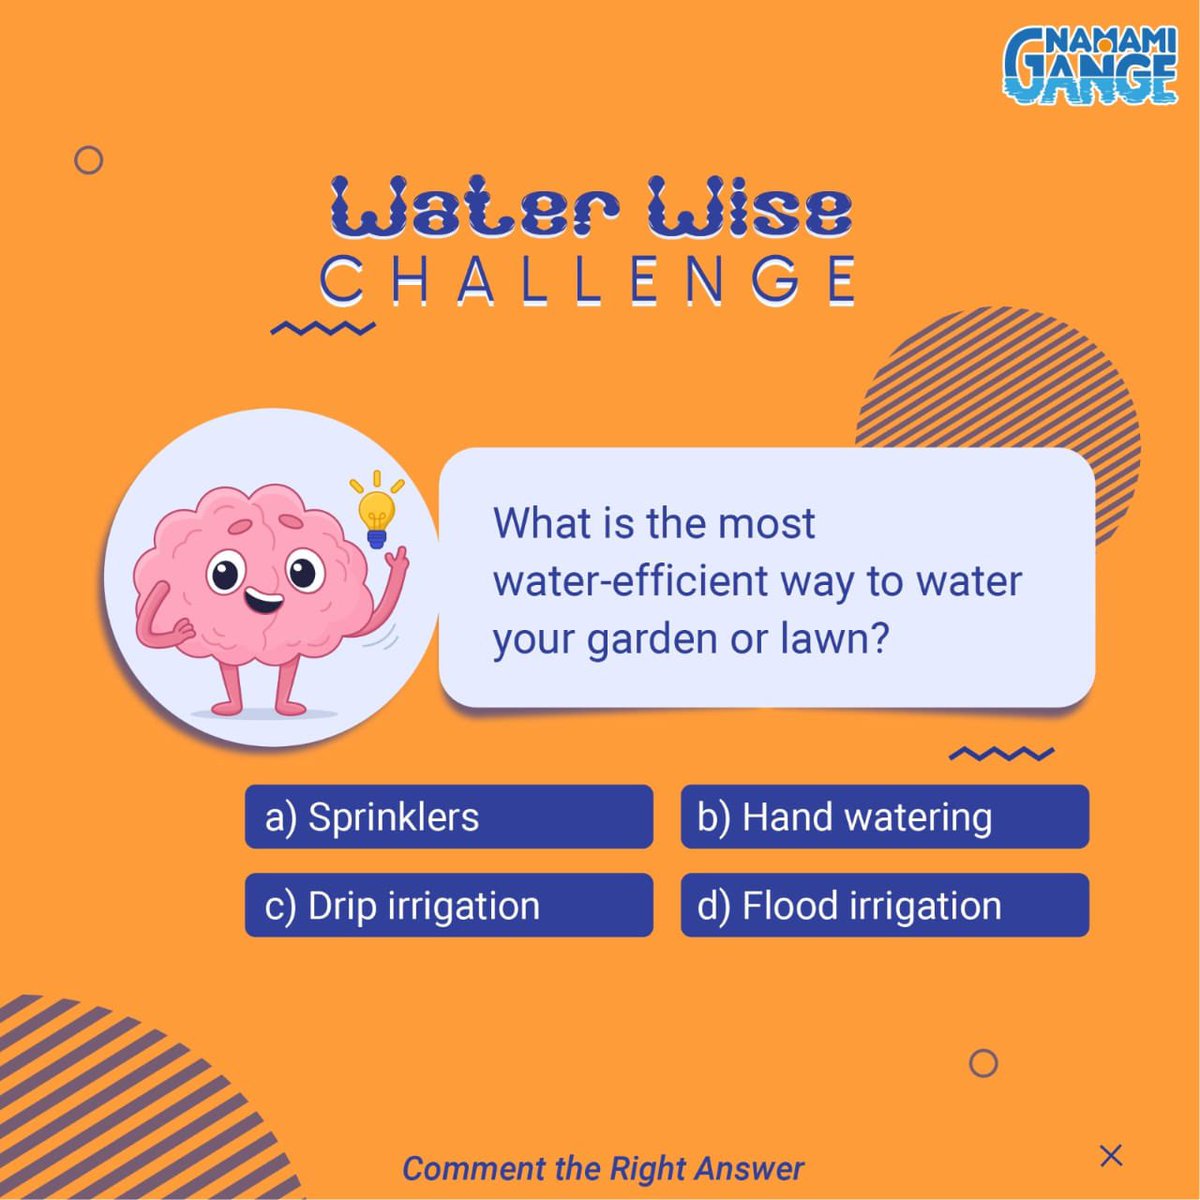 #WaterWiseChallenge

Let's conserve for a better tomorrow.

Test yourself with our quiz and see if you're right!

Tell us your answer in the comment section.

#WaterConservation #EnvironmentalAwareness #TestYourKnowledge
#QuizTime
#NamamiGange